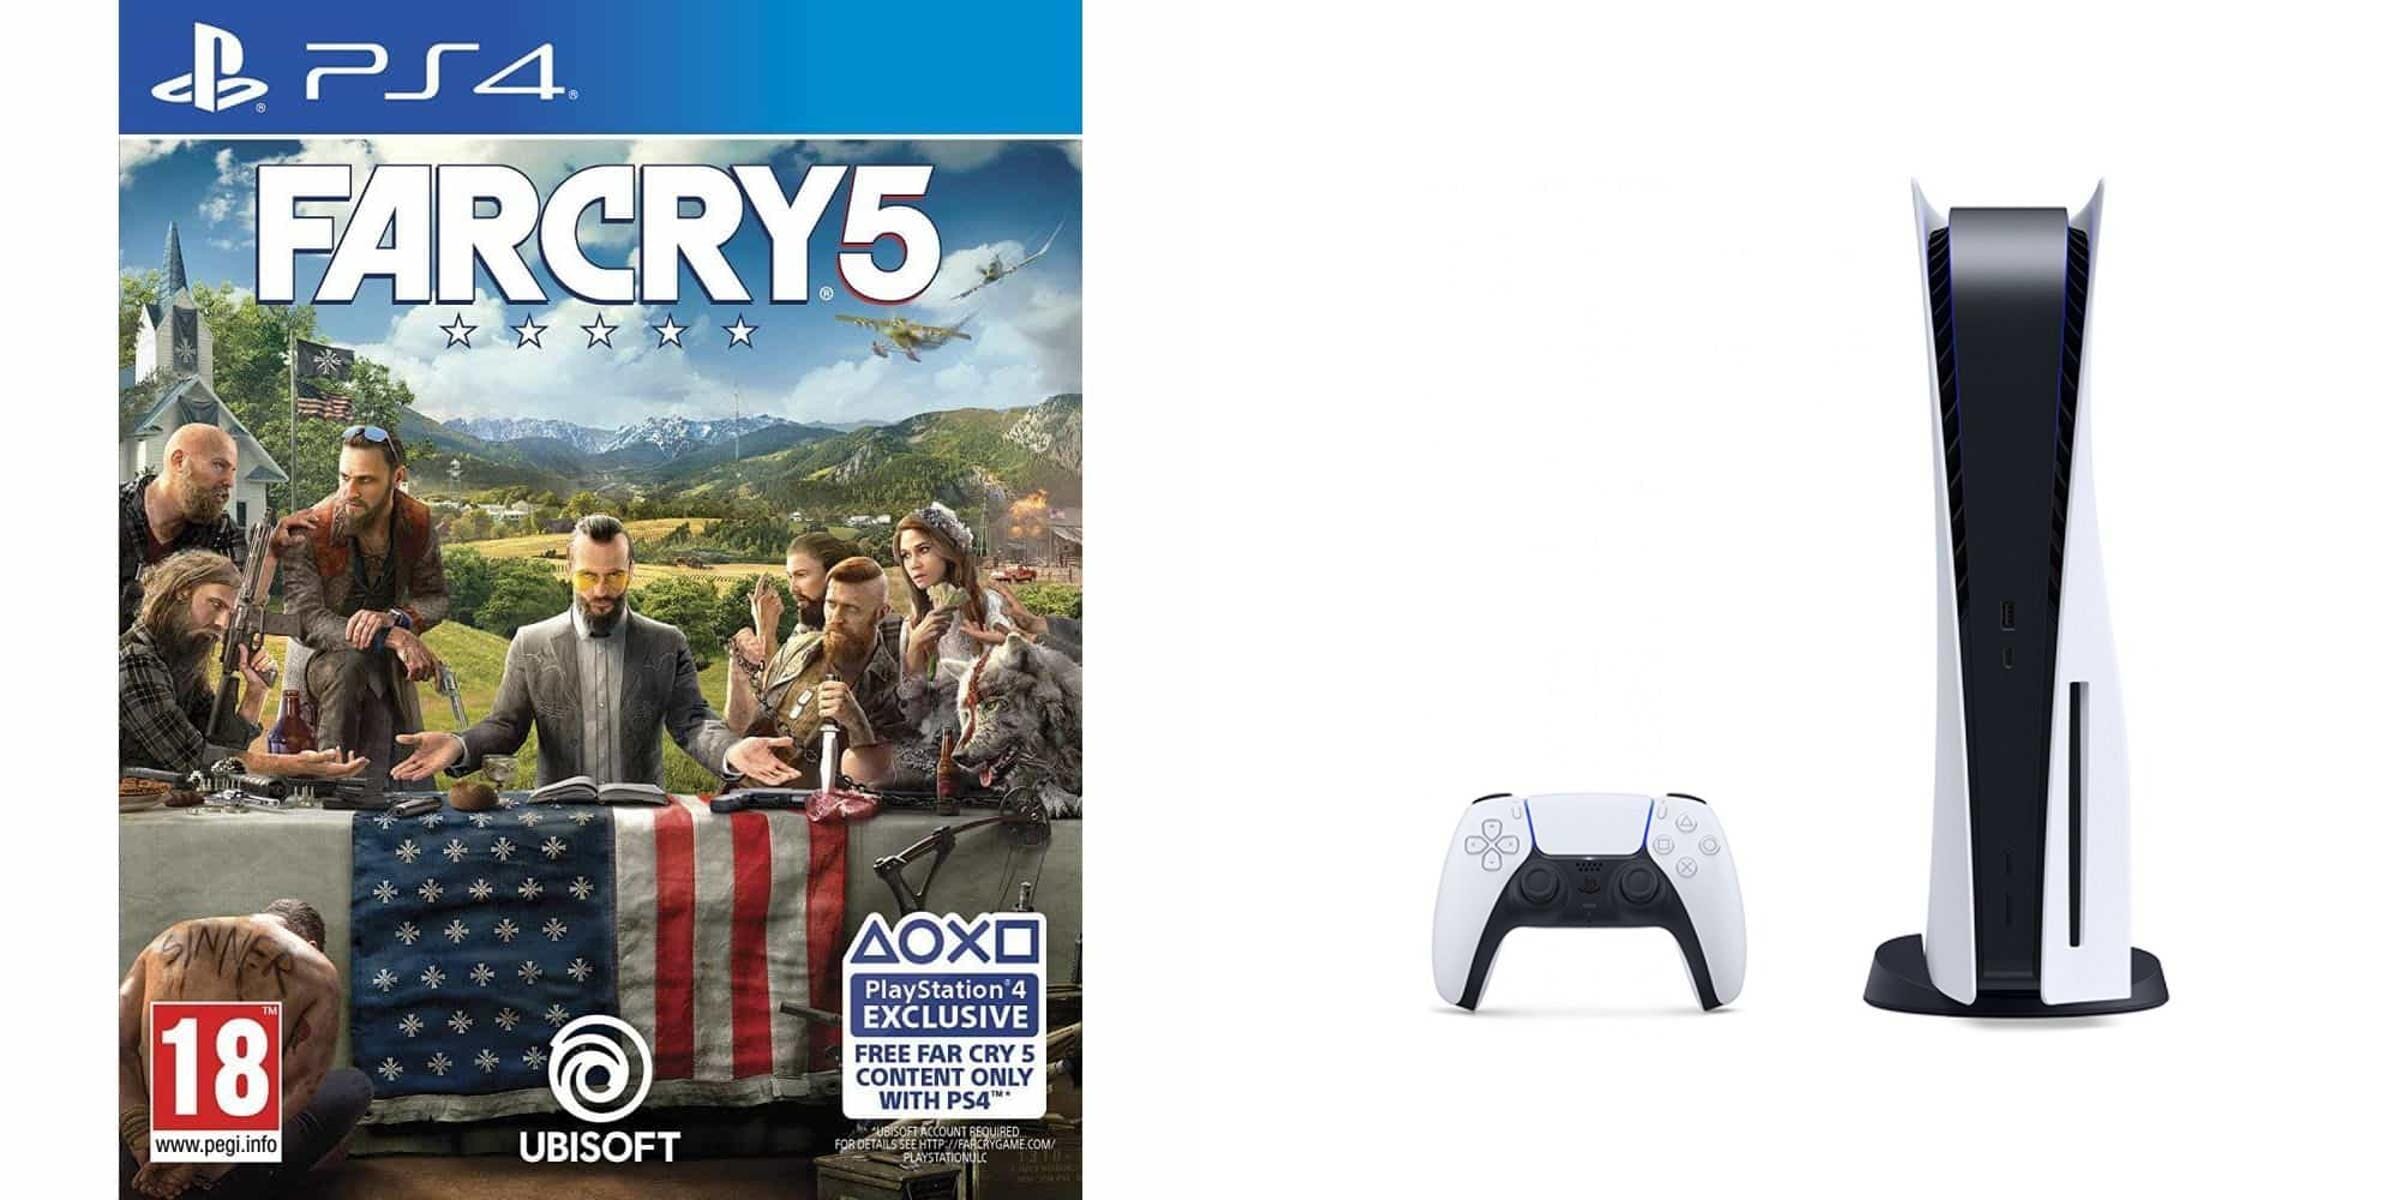 Sony PlayStation 5, 1 Wireless Controller, White - CFI-1016A01 MEE, with Far Cry 5 for PlayStation 4